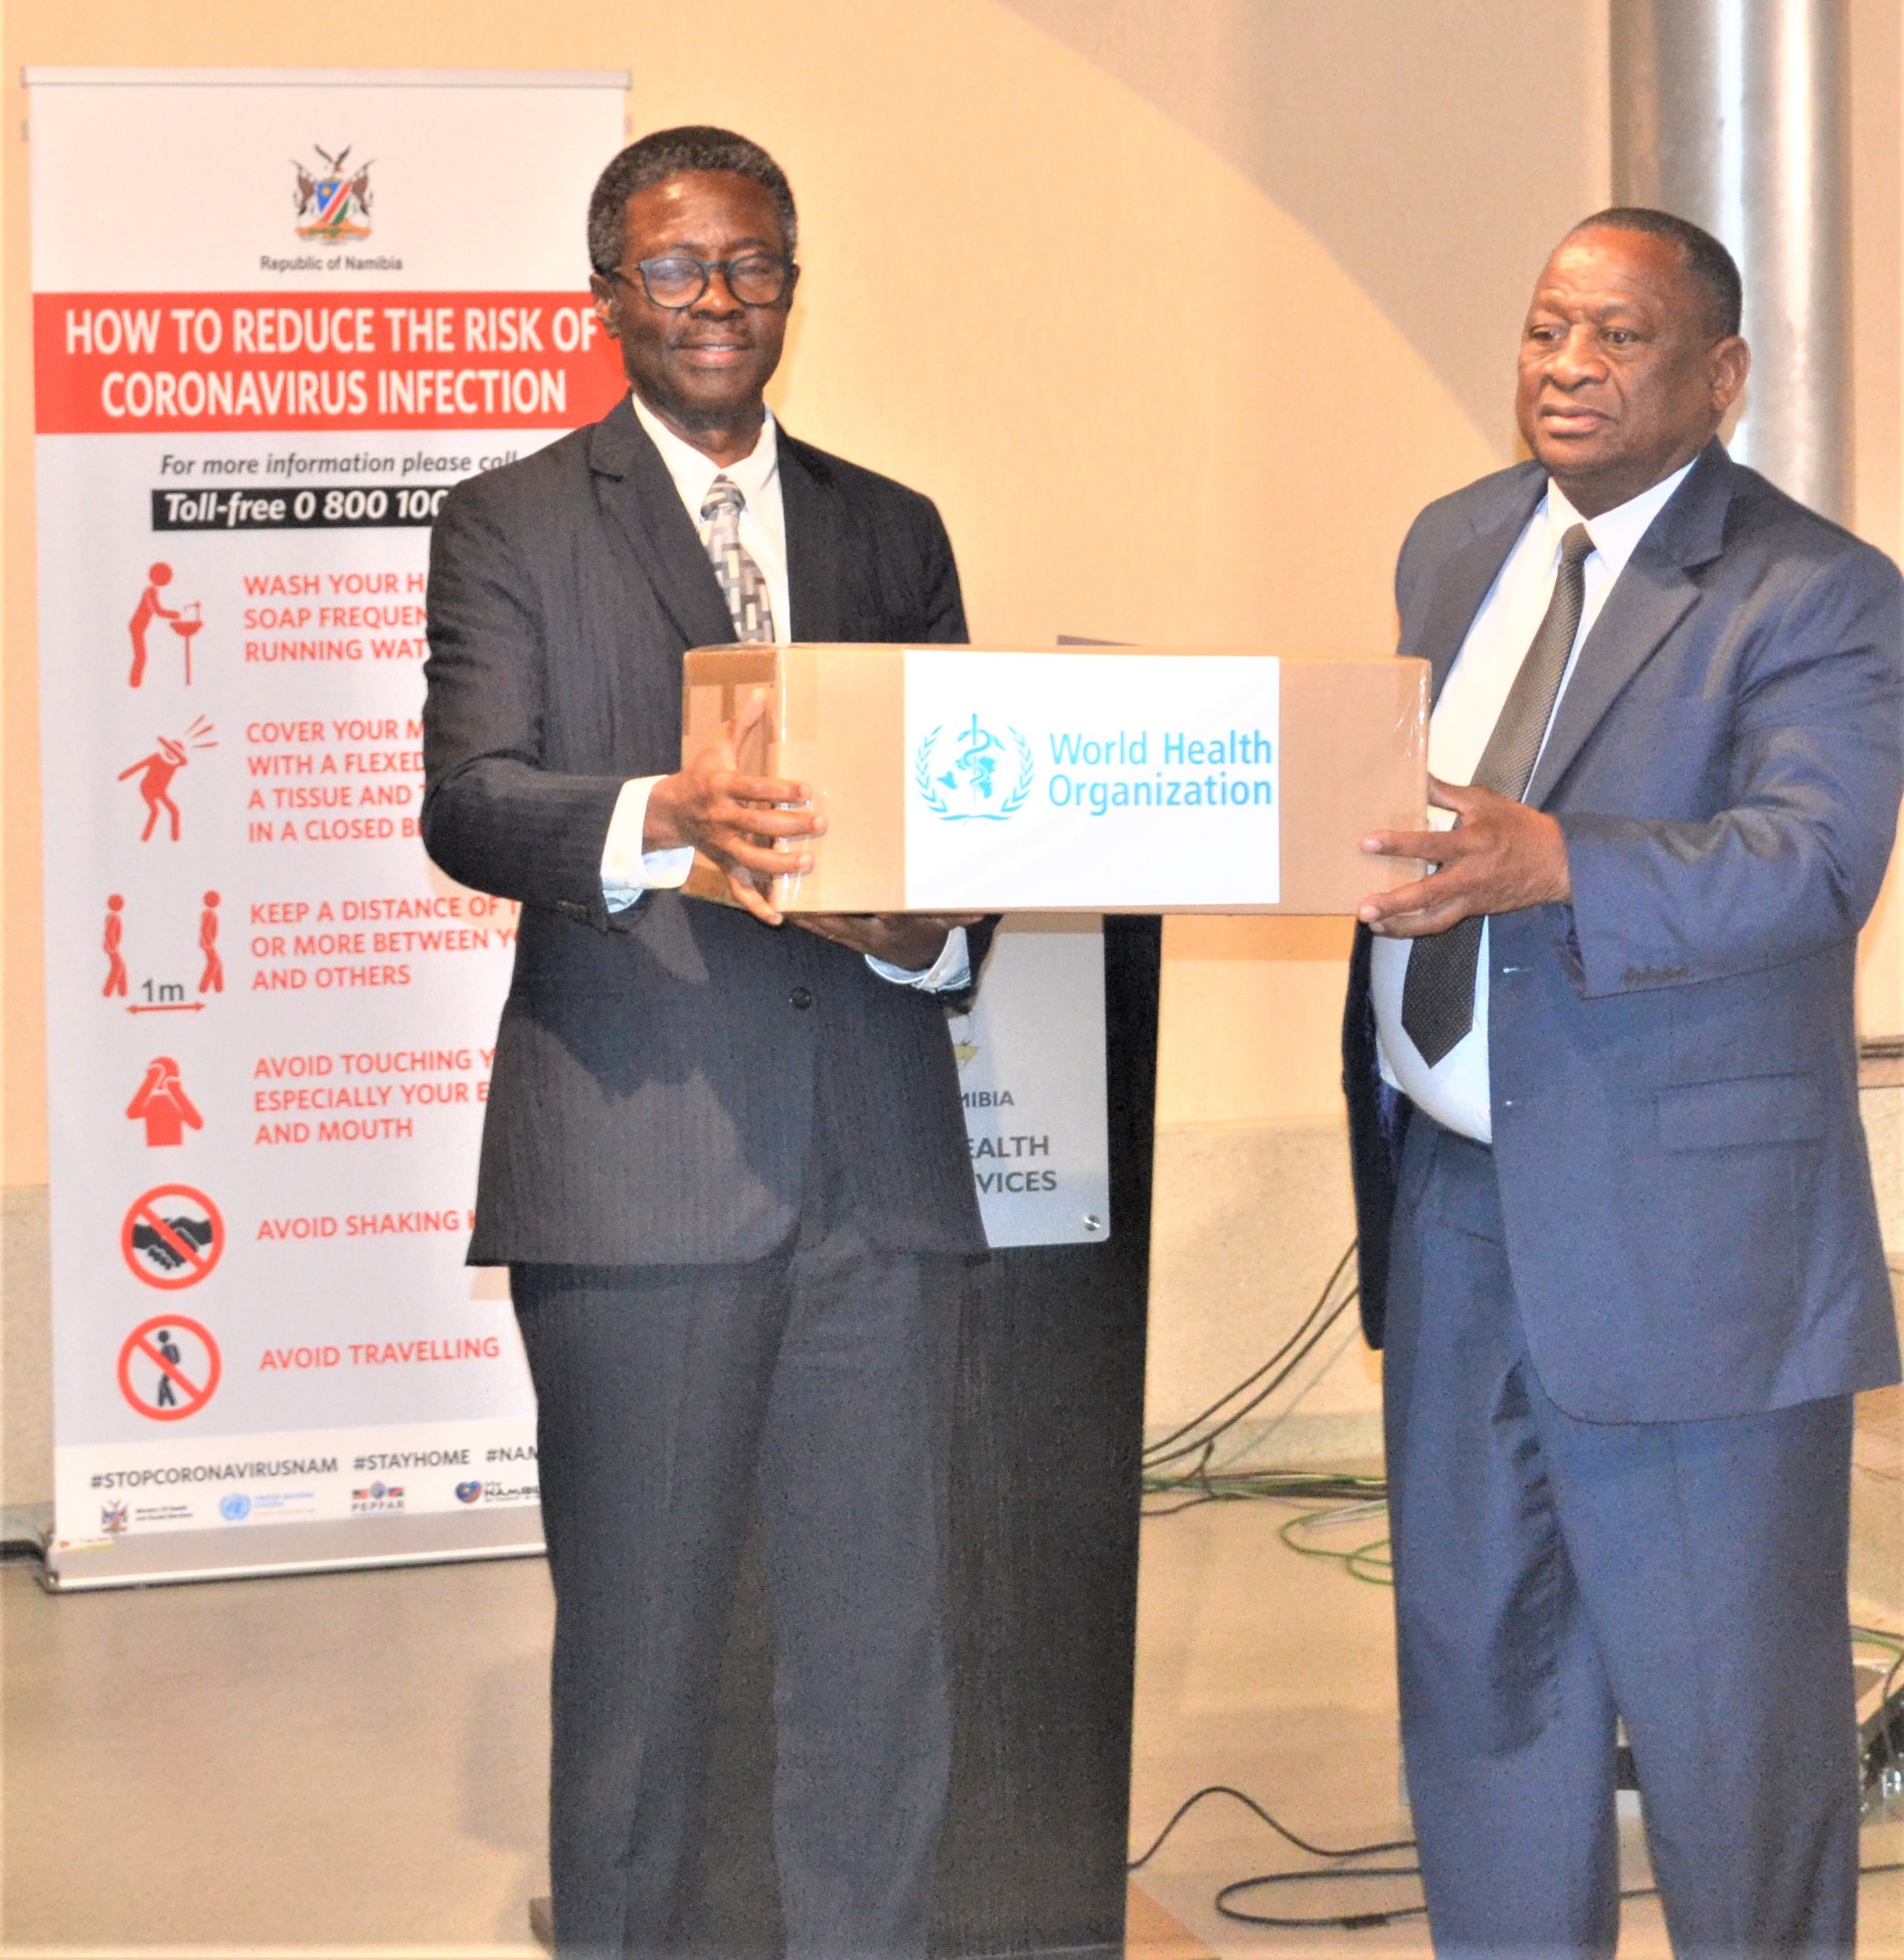 WHO Representative, Dr Charles Sagoe-Moses handing over COVID-19 medical supplies to the Honorable Minister of Health and Social Services, Dr. Kalumbi Shangula 